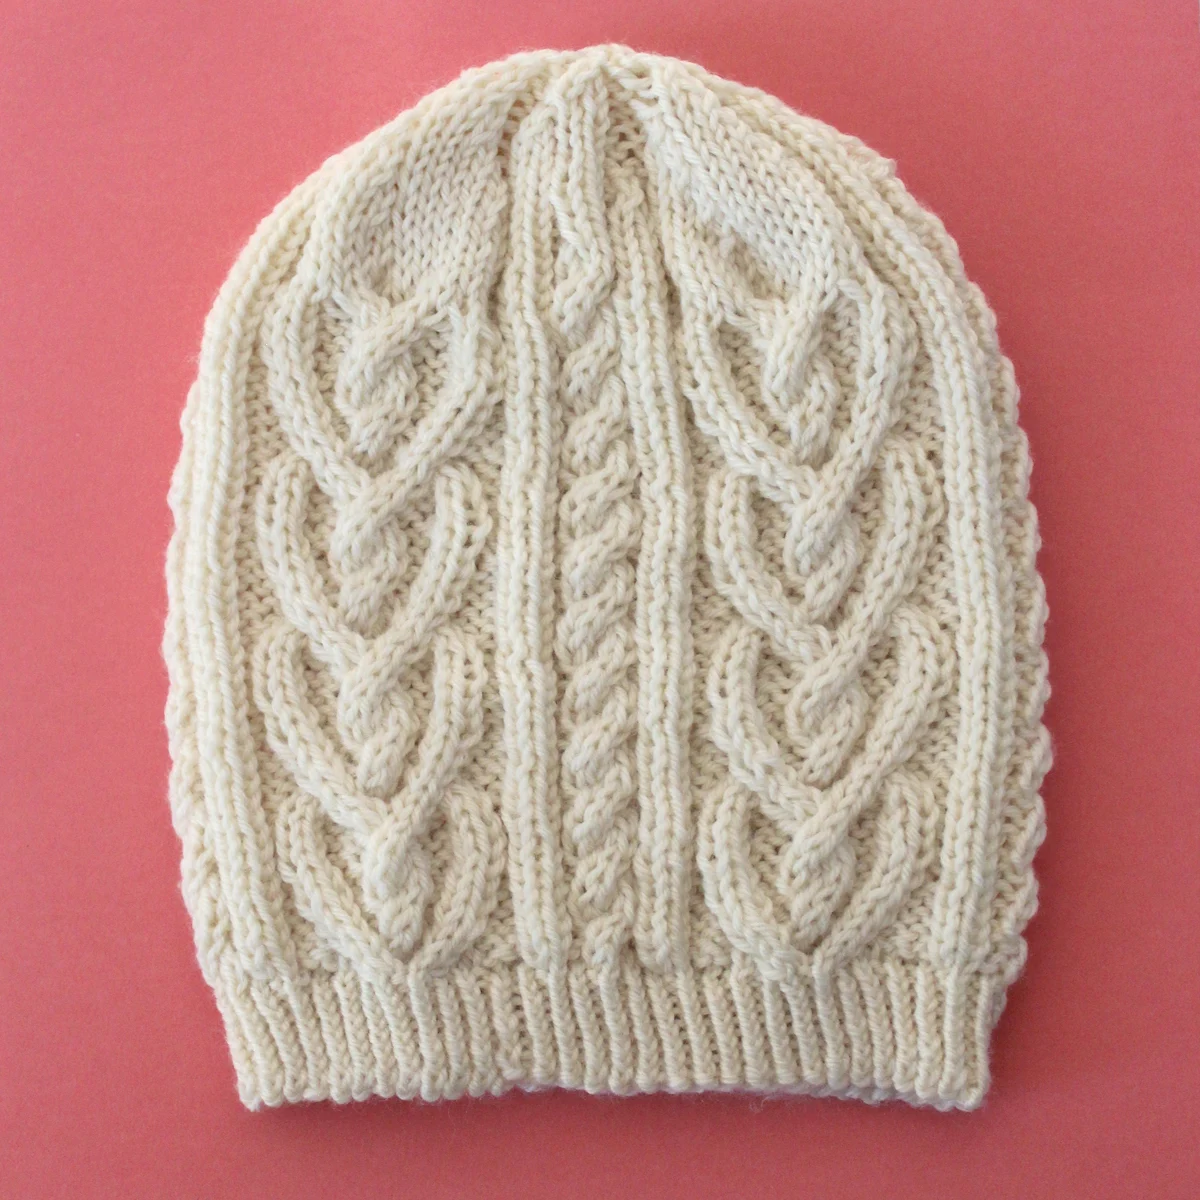 Cable Heart Hat Knitted in cream color yarn by Studio Knit.